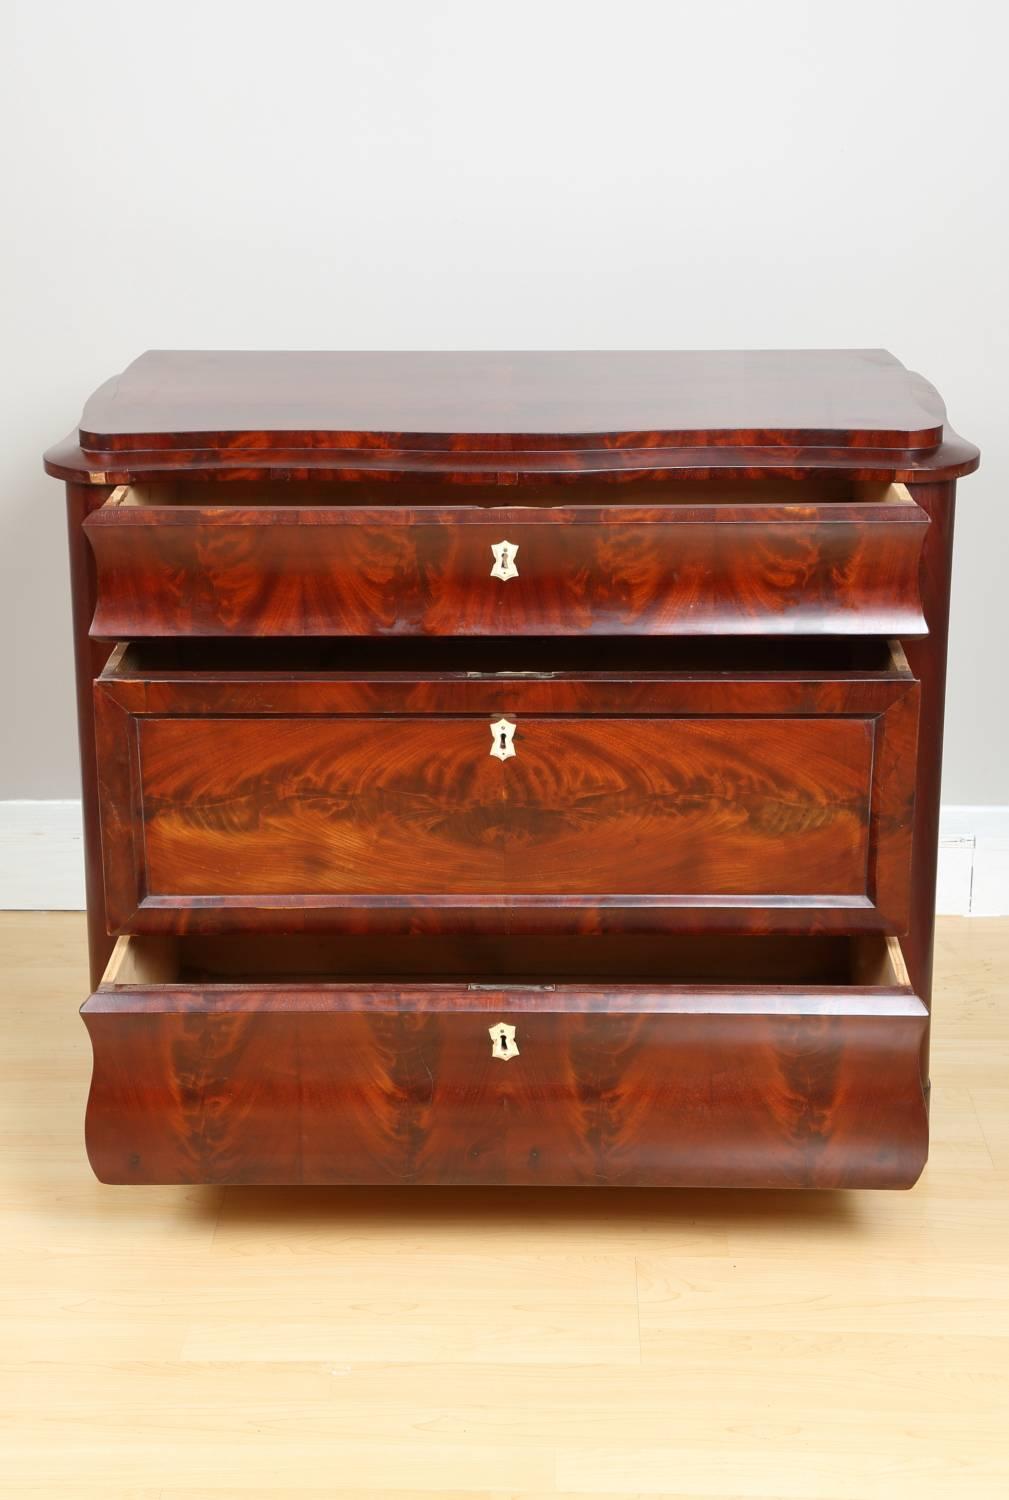 Biedermeier mahogany chest of drawers, circa 1840. Chest of drawers from Germany Biedermeier period. Featuring three drawers with original keys, which also serve as hardware. The chest has been professionally restored and polished by hand with